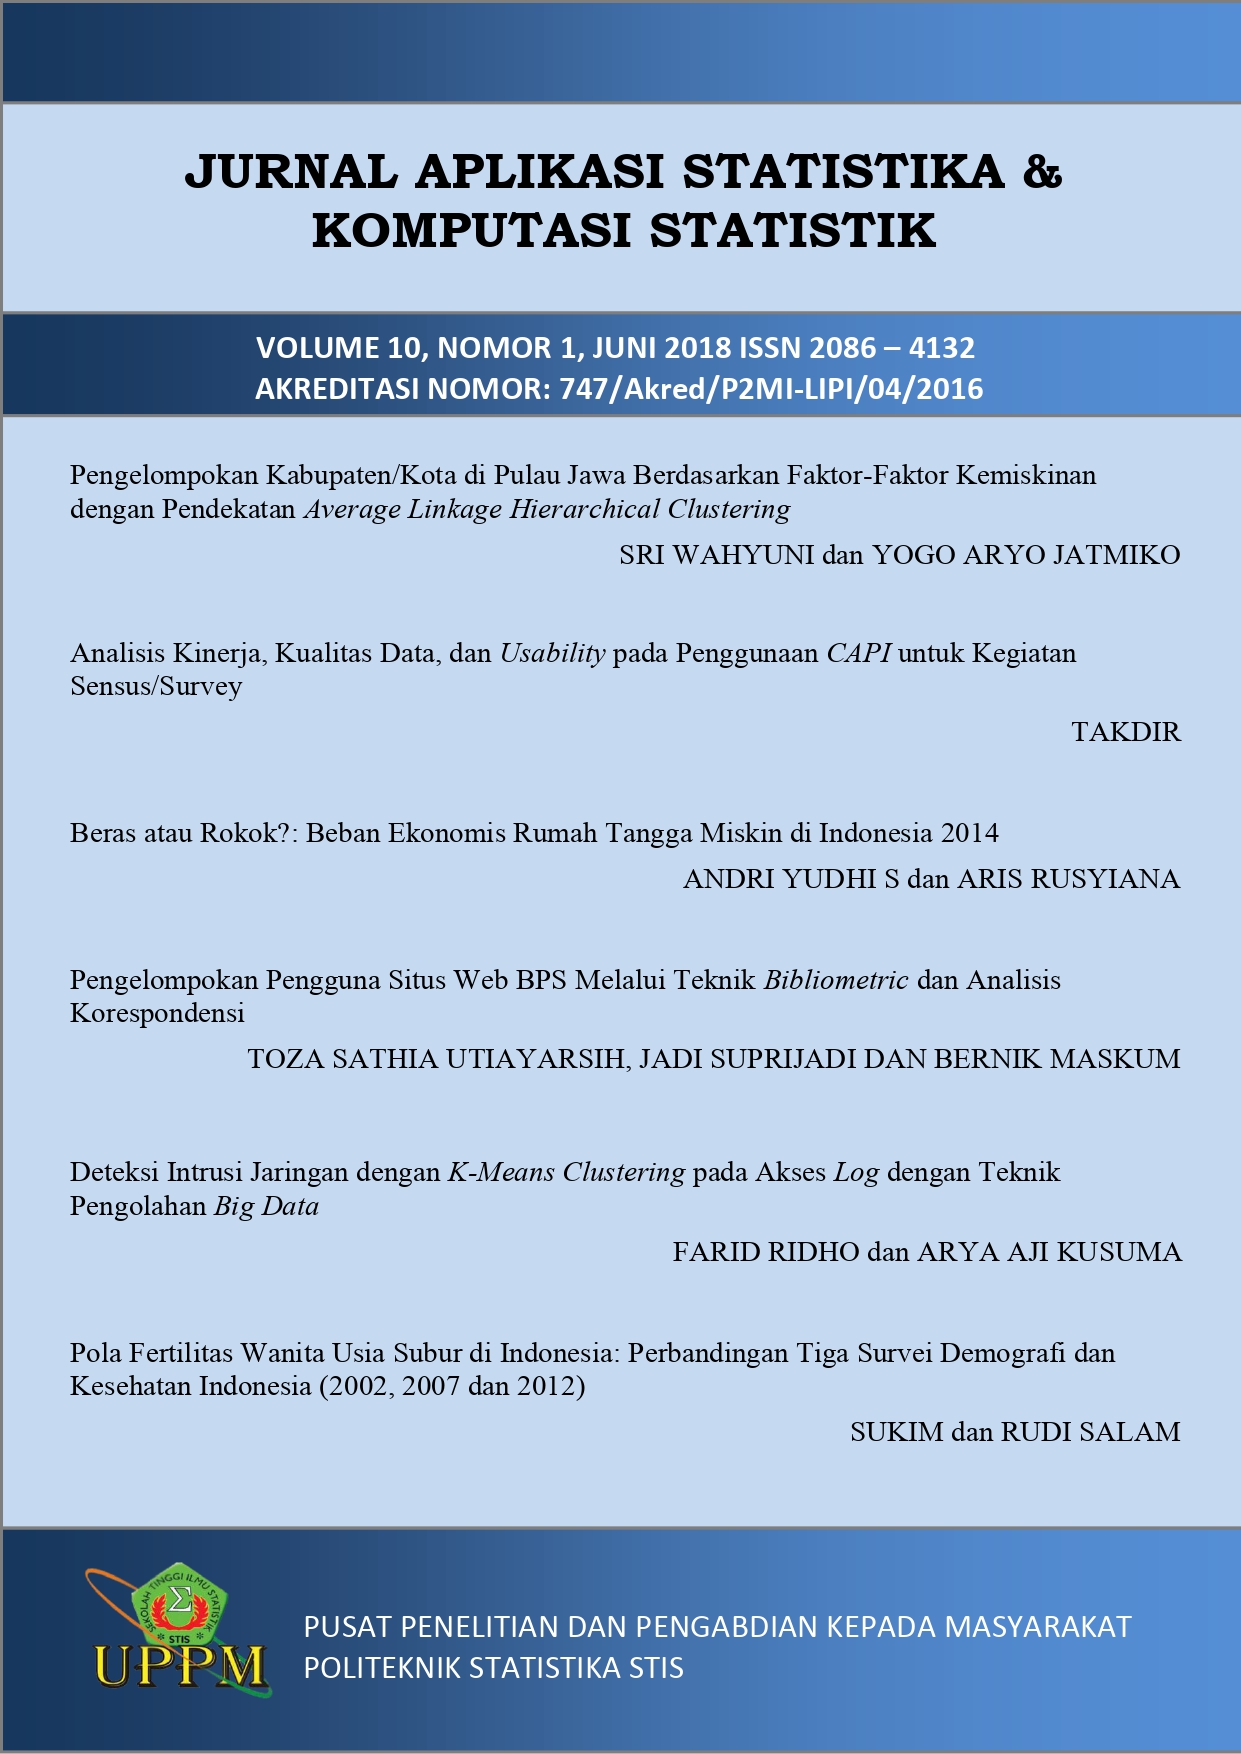 					View Vol. 10 No. 1 (2018): Journal of Statistical Application and Computational Statistics
				